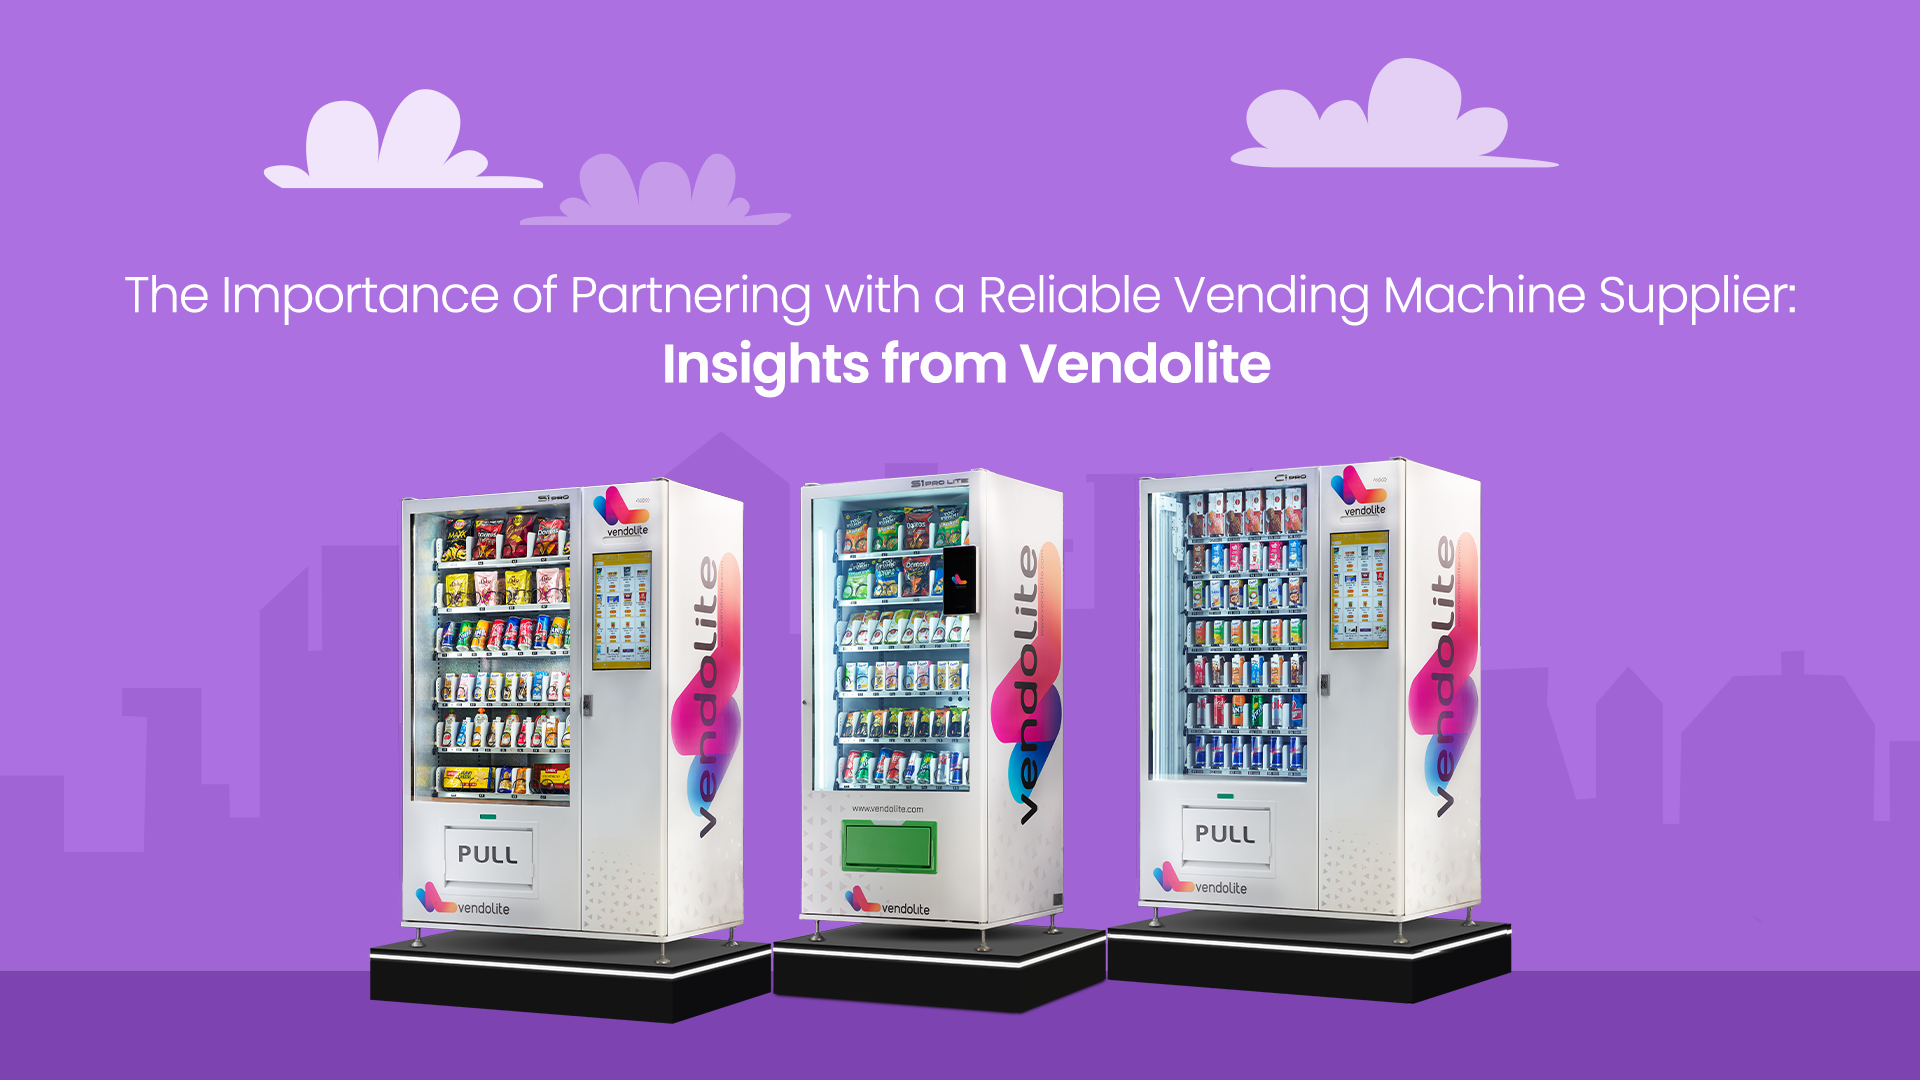 The Importance of Partnering with a Reliable Vending Machine Supplier: Insights from Vendolite